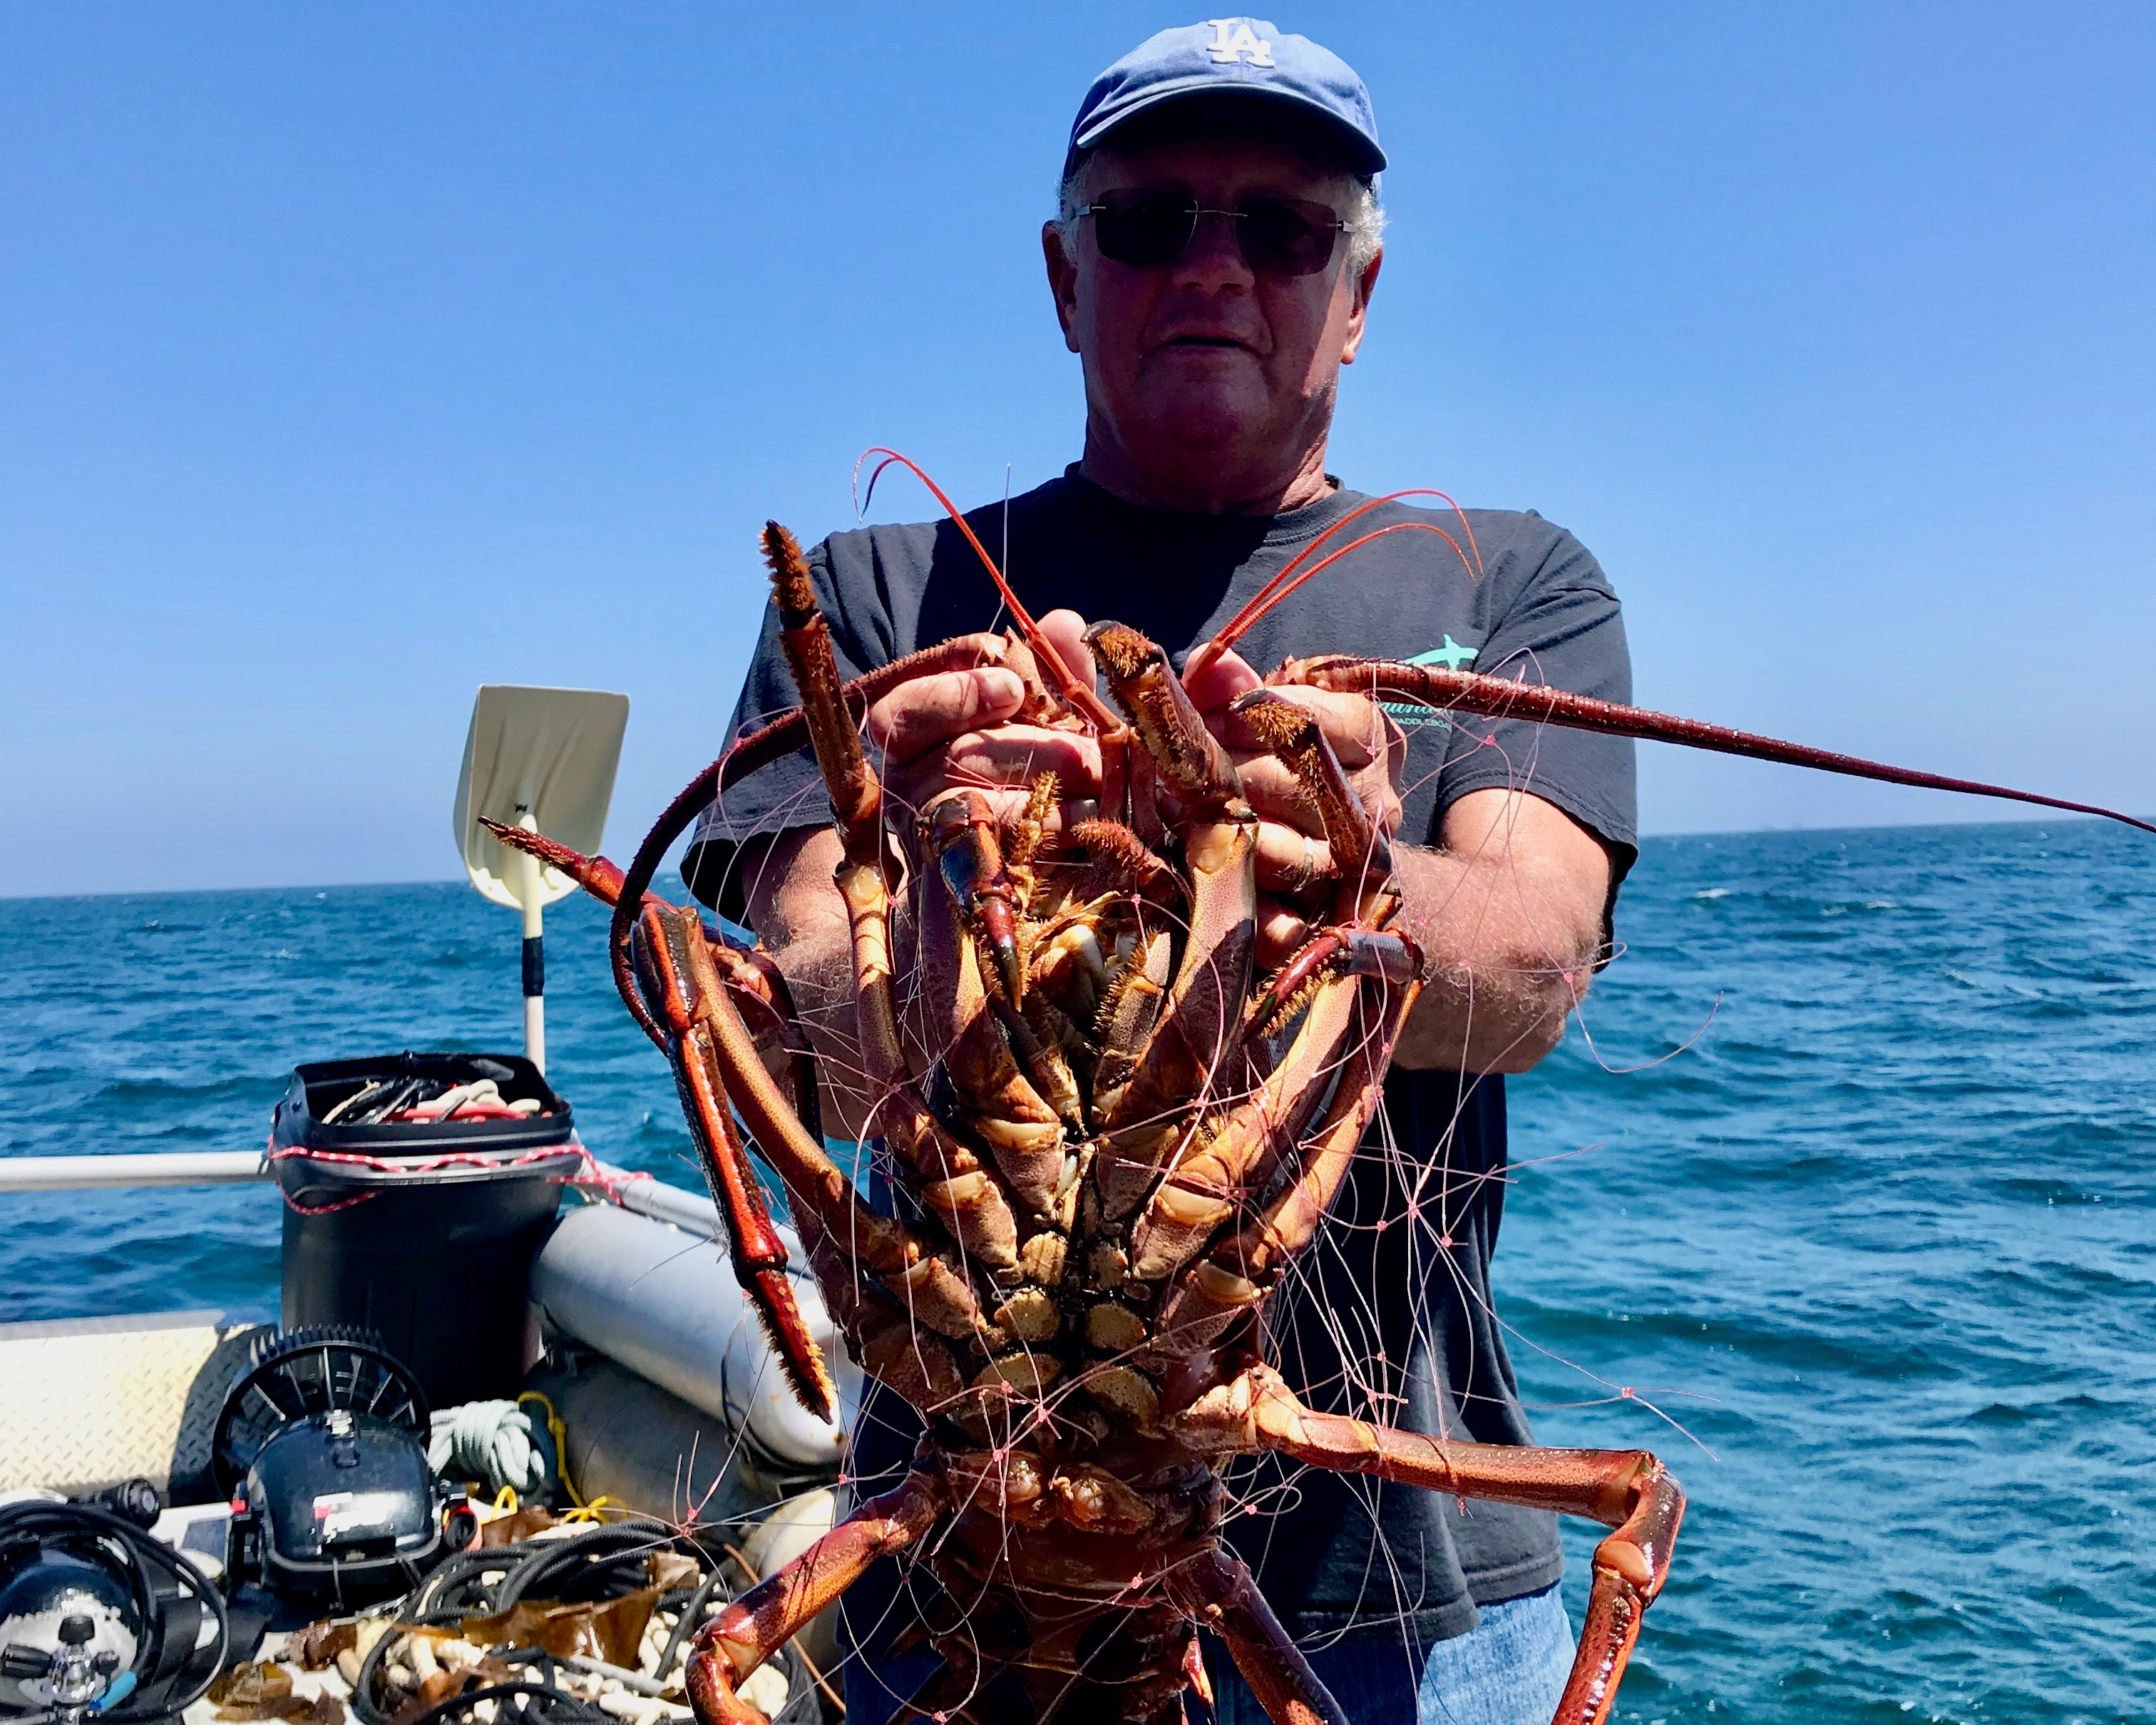 Boater holds a live lobster with ocean background